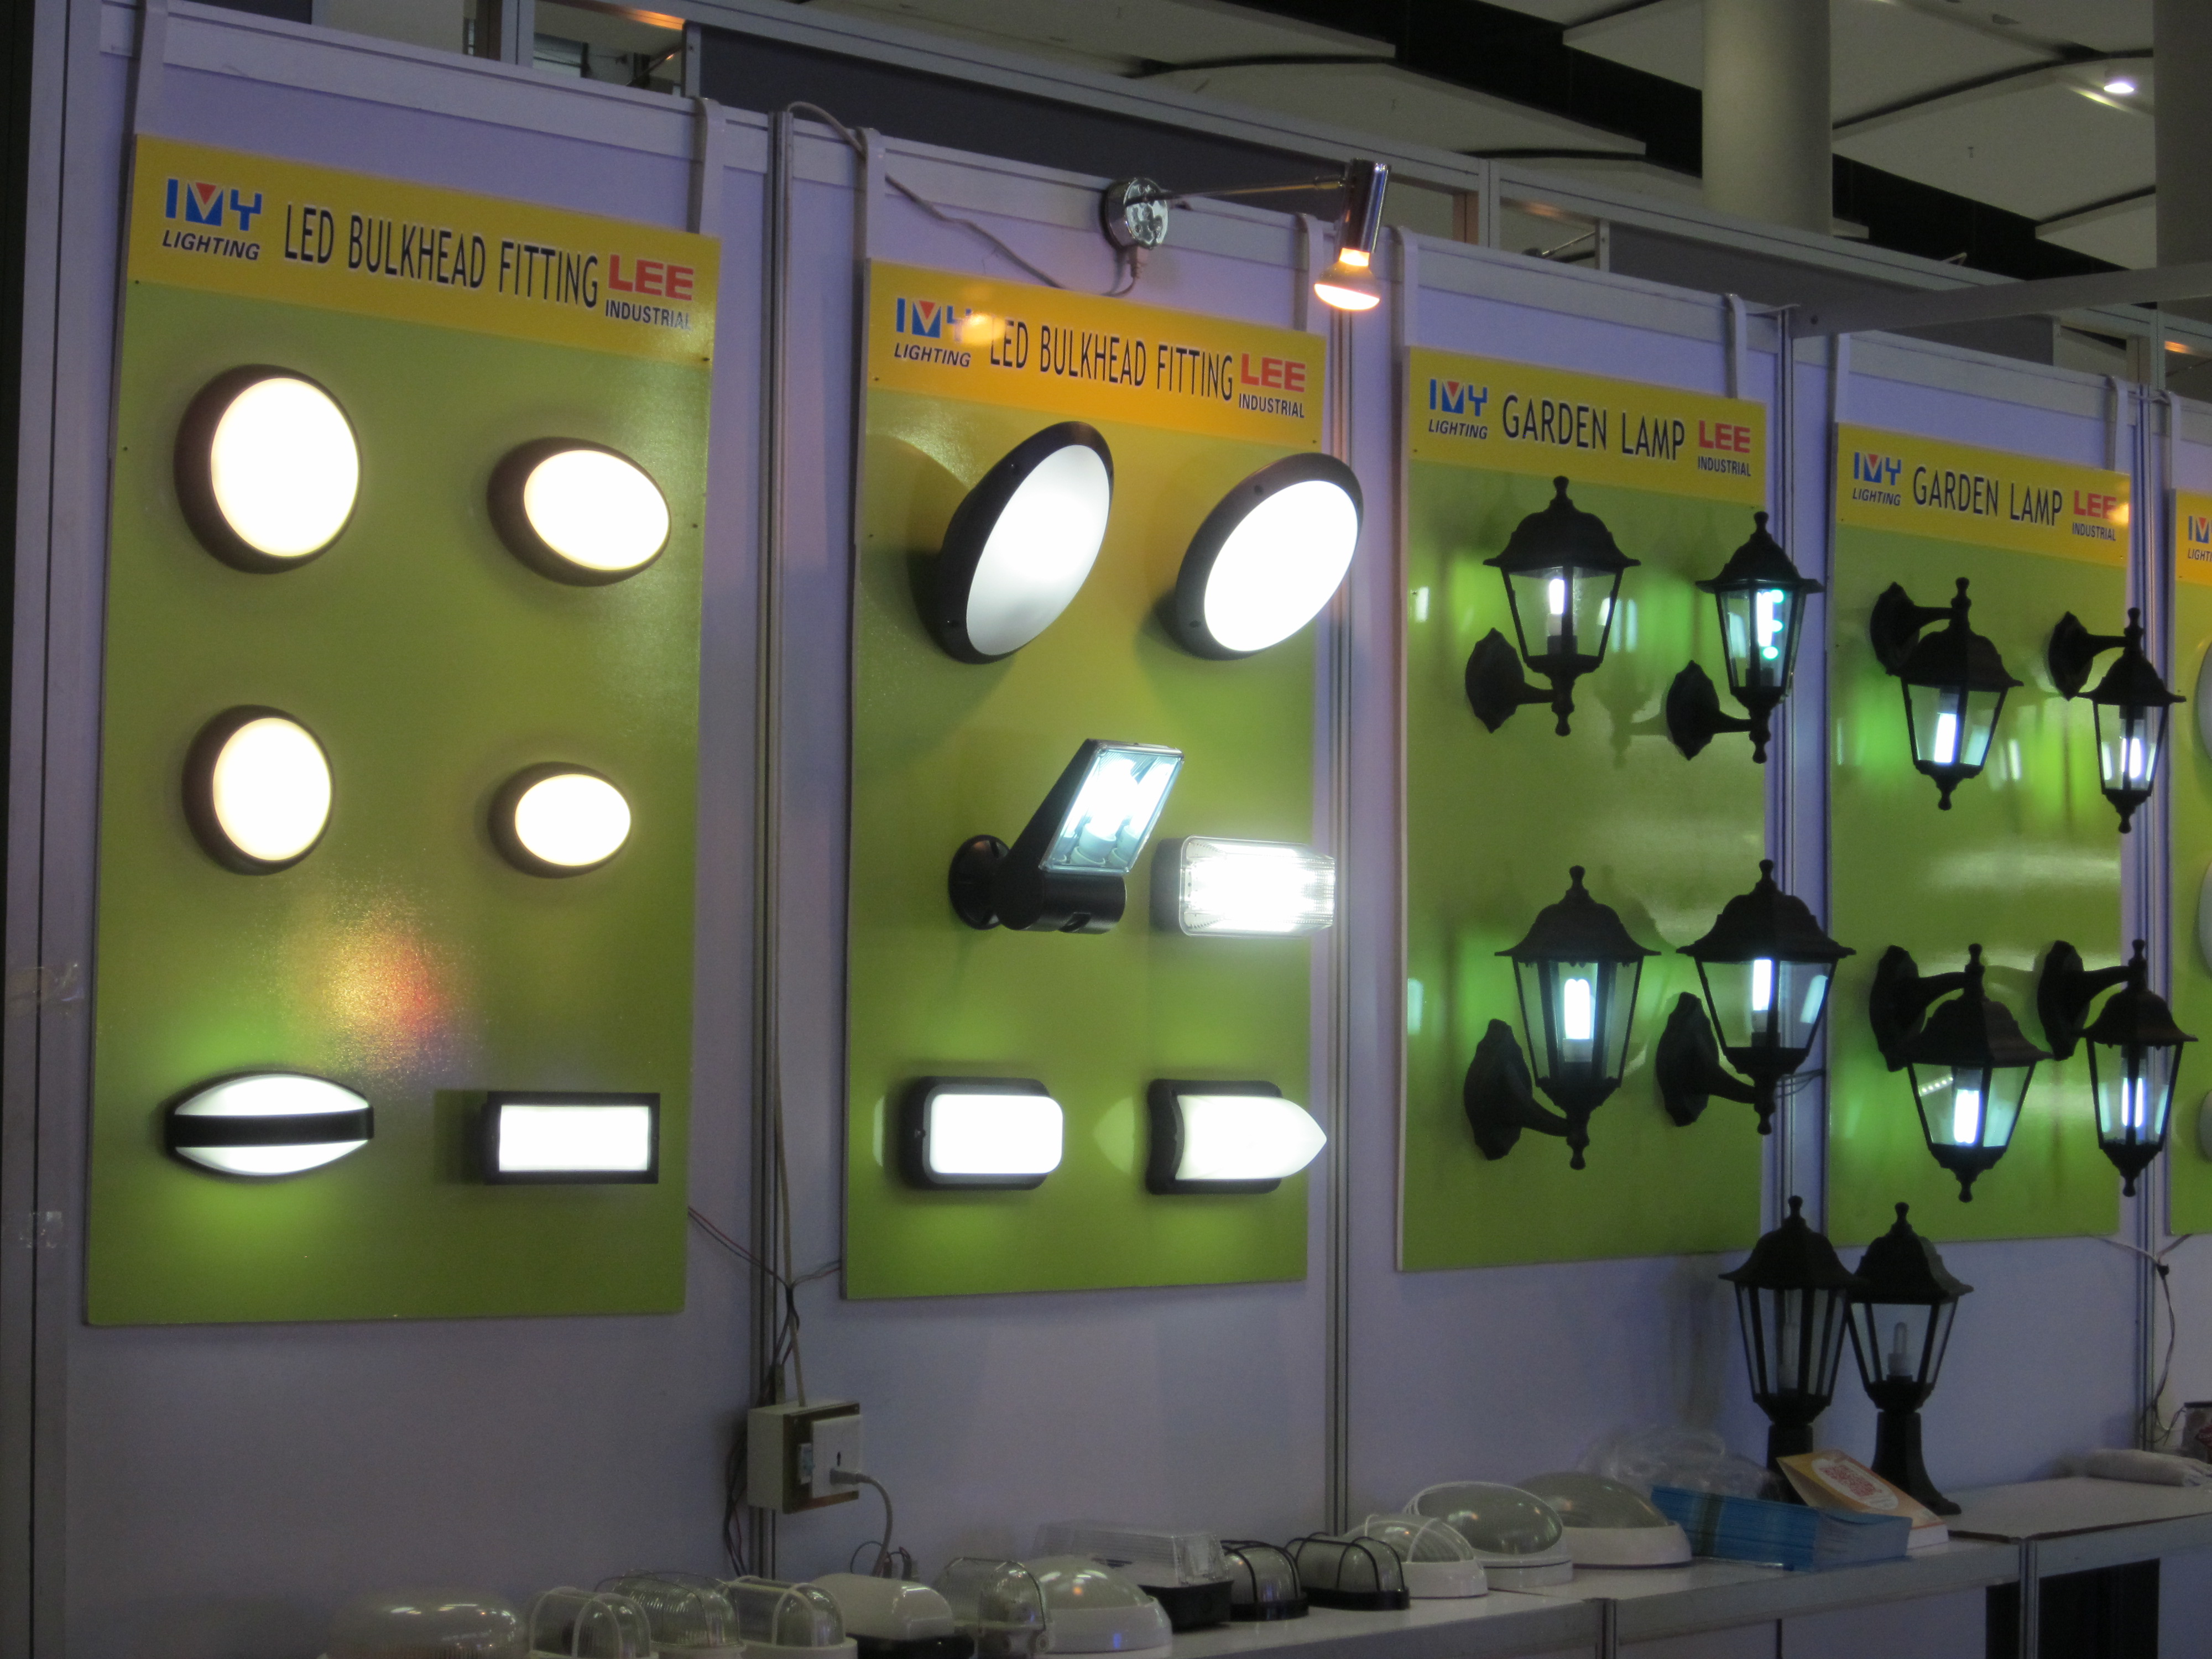 LED products on show at the 18th Guangzhou International Lighting Exhibition.